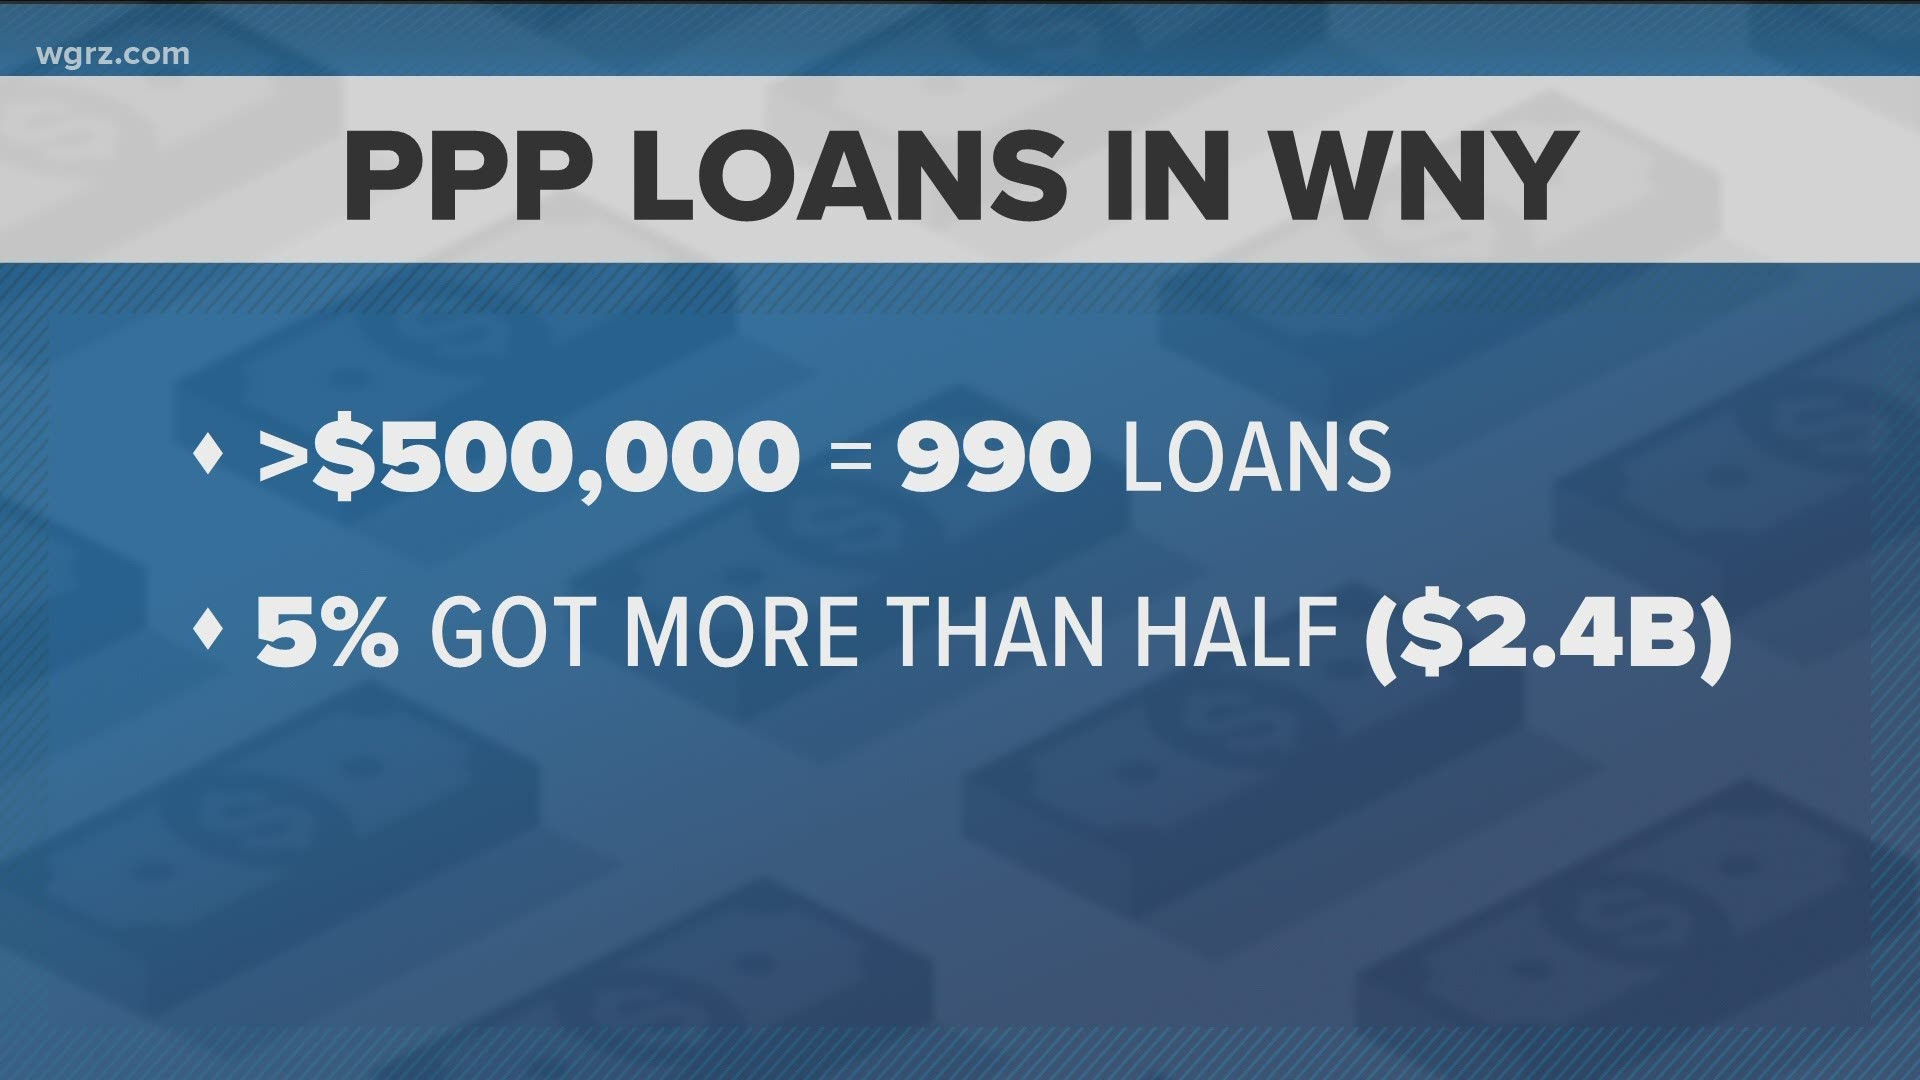 we're getting a in-depth look at the way funds were distributed from the federal Paycheck Protection Program or P-P-P...